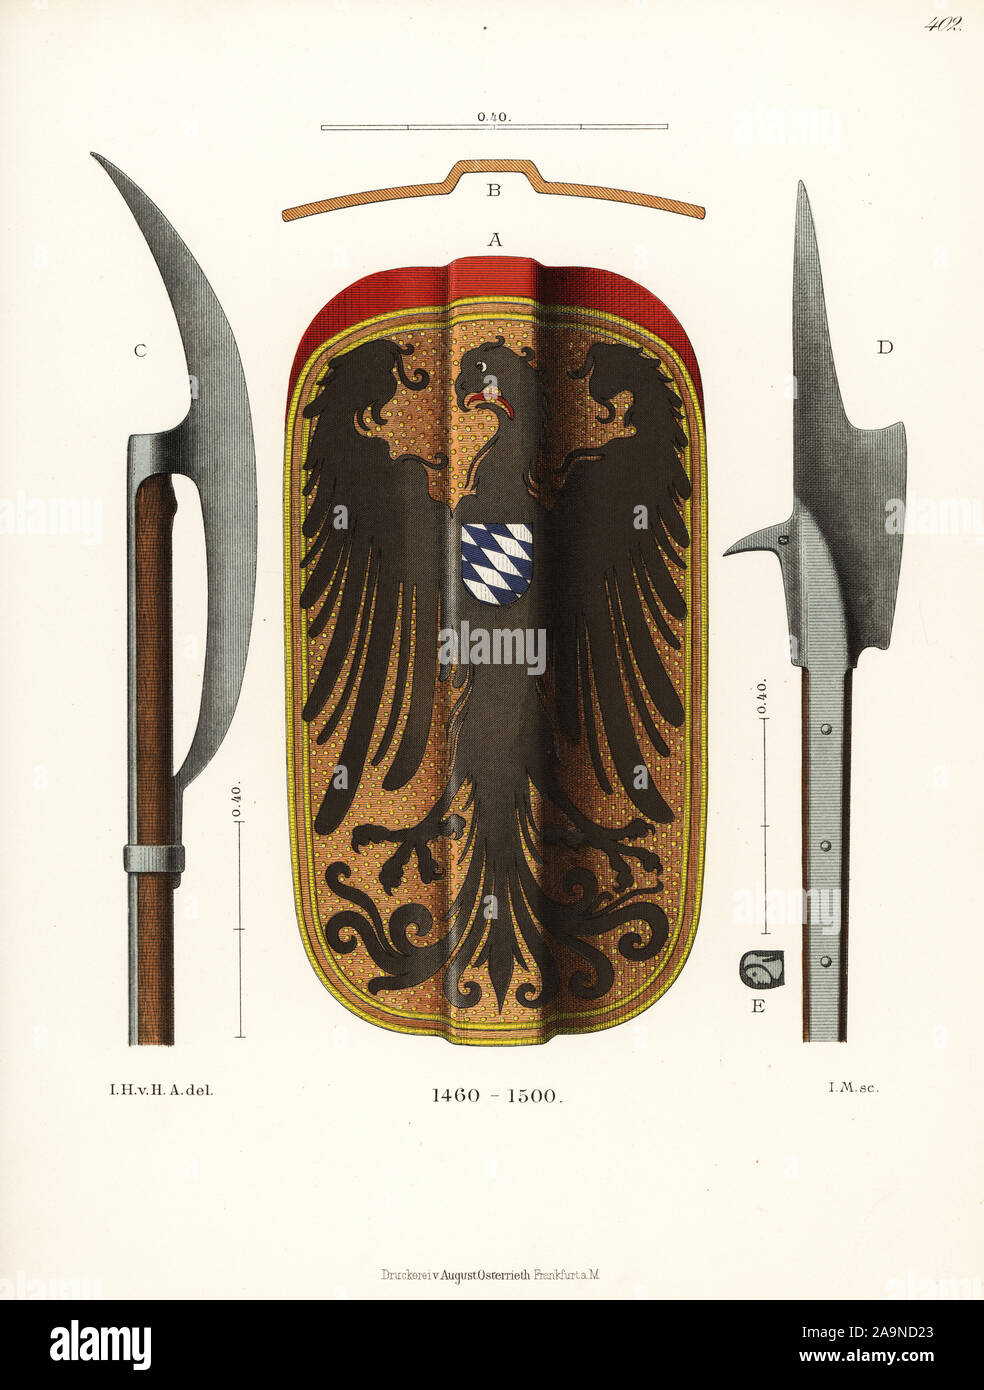 Shield and weapons of the late 15th century. Shield with the coat of arms of Deggendorf, Bavaria A,B; Steitart or pole axe C, and Helmbarte or halberd D. Chromolithograph from Hefner-Alteneck's Costumes, Artworks and Appliances from the Middle Ages to the 17th Century, Frankfurt, 1889. Illustration by Dr. Jakob Heinrich von Hefner-Alteneck, lithographed by I.M. Dr. Hefner-Alteneck (1811 - 1903) was a German museum curator, archaeologist, art historian, illustrator and etcher. Stock Photo